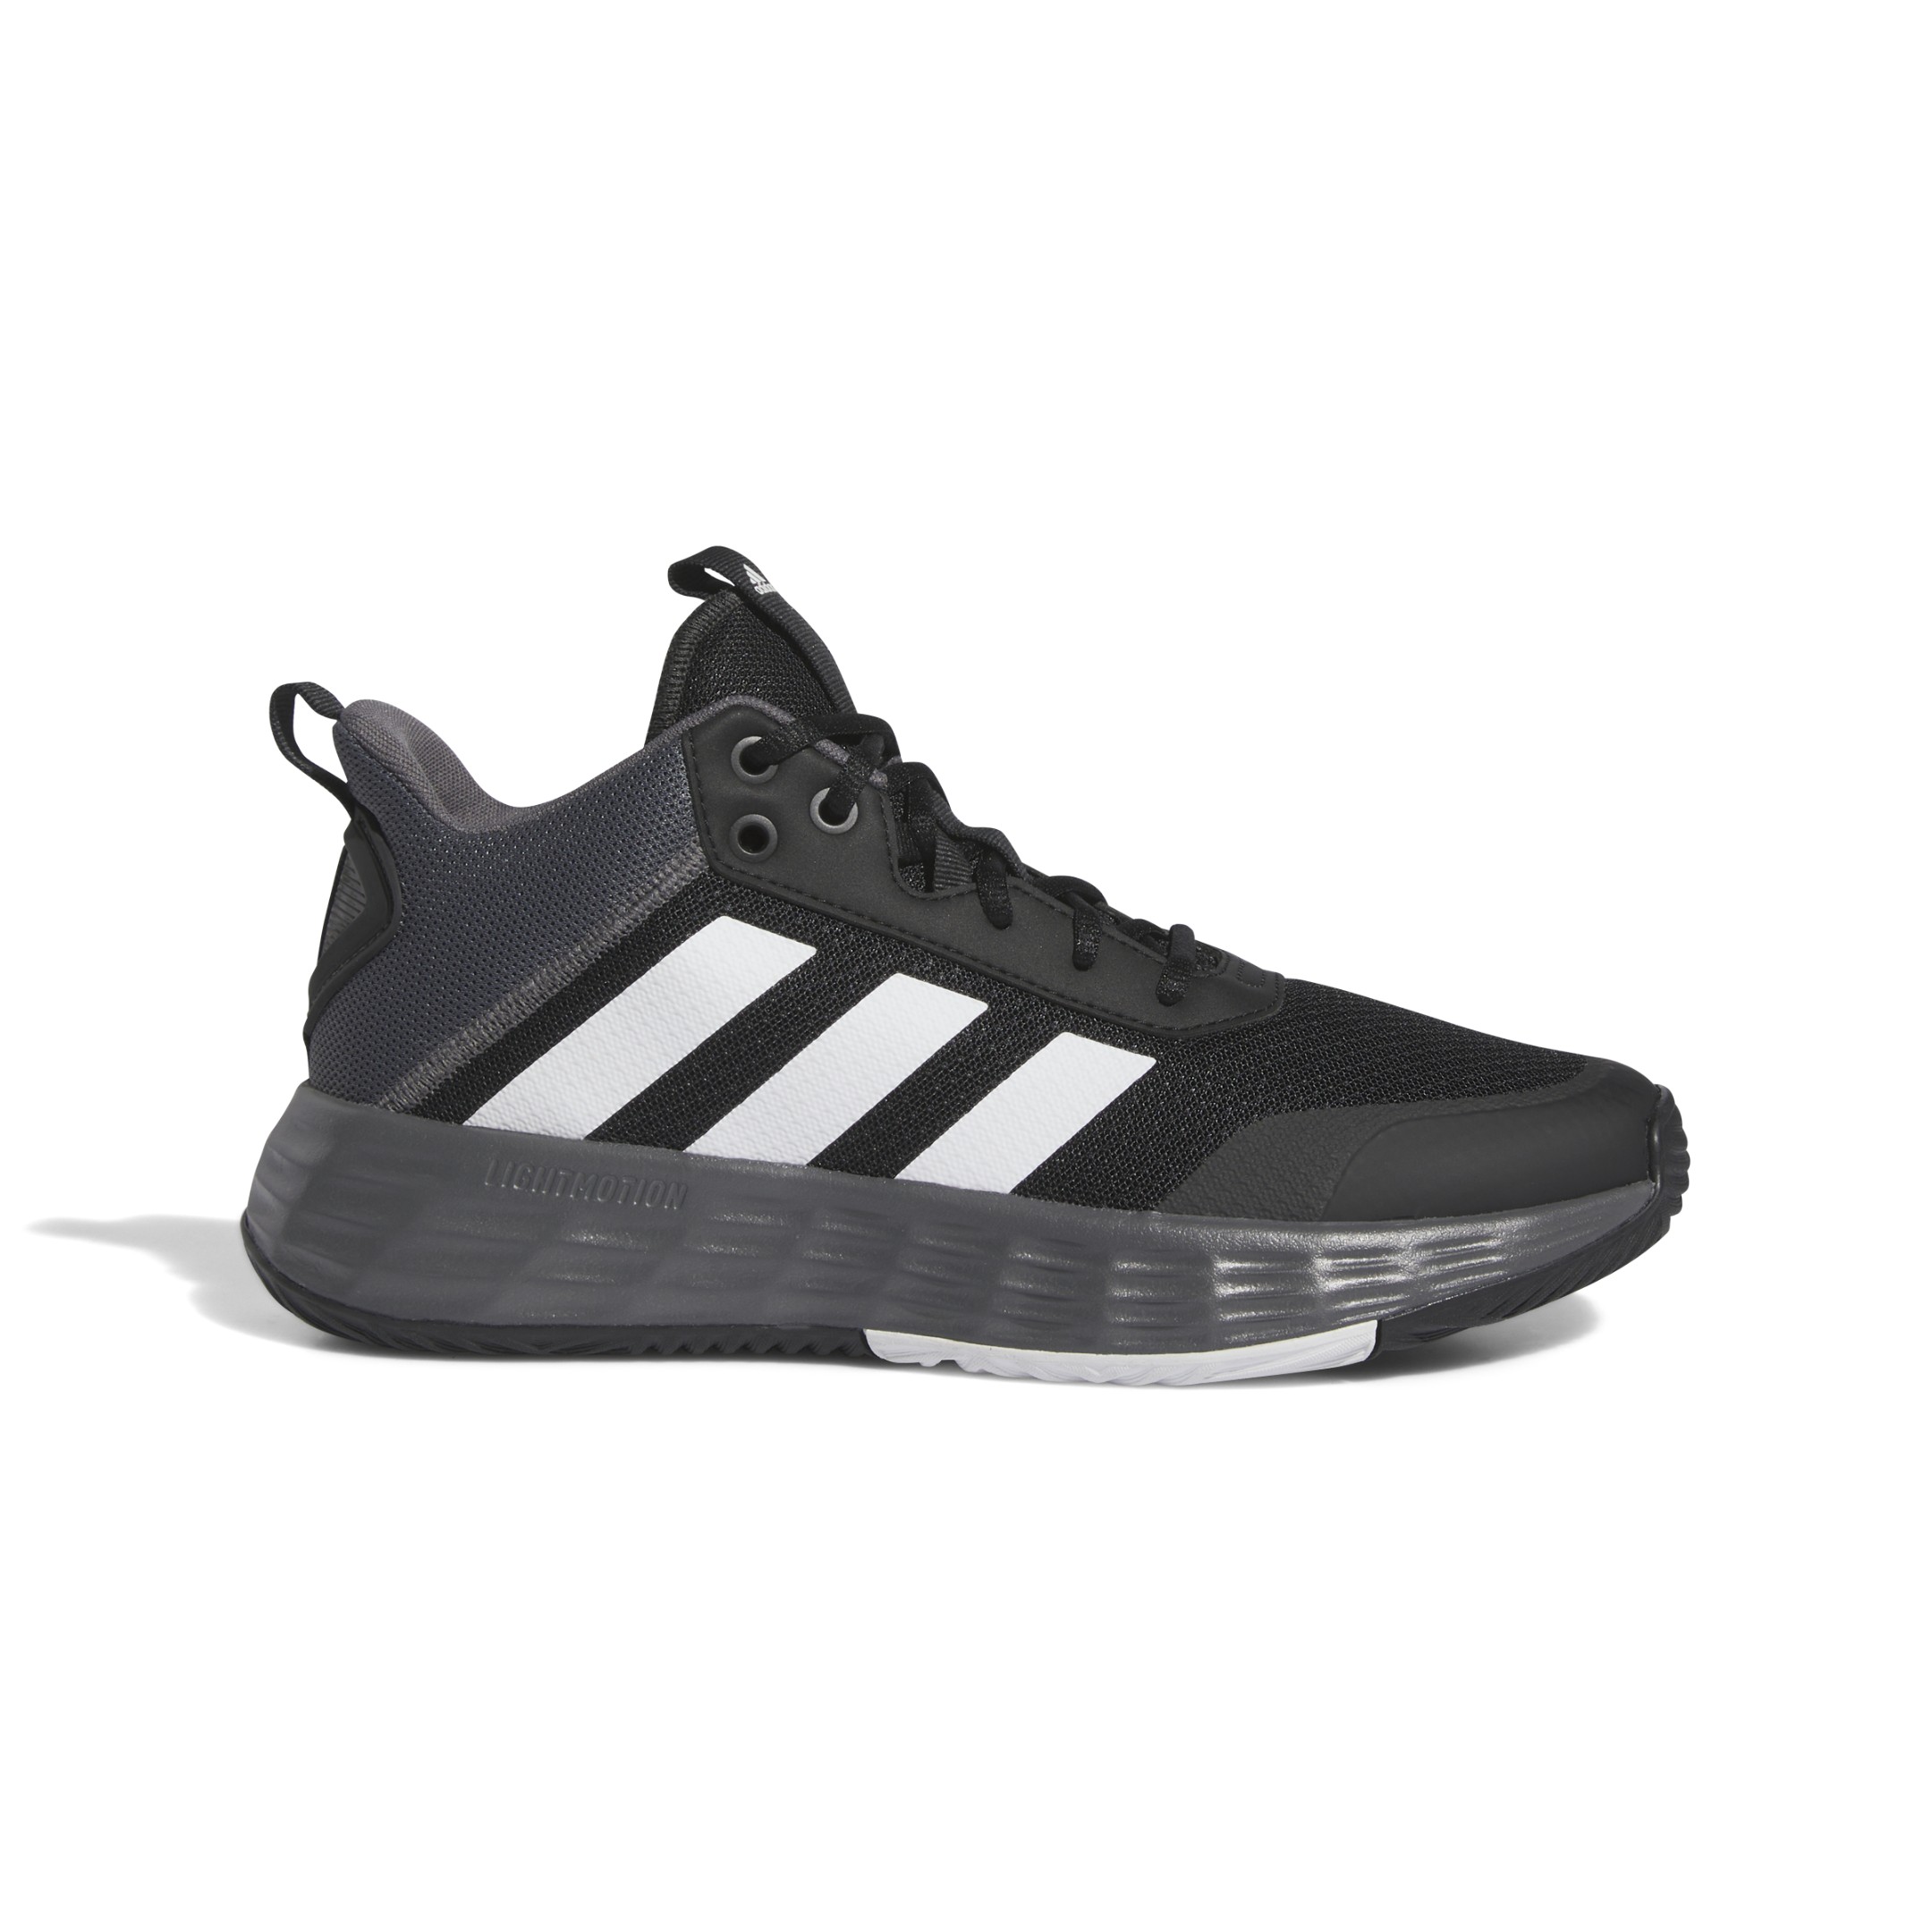 DEPORTIVO OWNTHEGAME 2.0 CORE BLACK / GREY FIVE / CLOUD WHITE